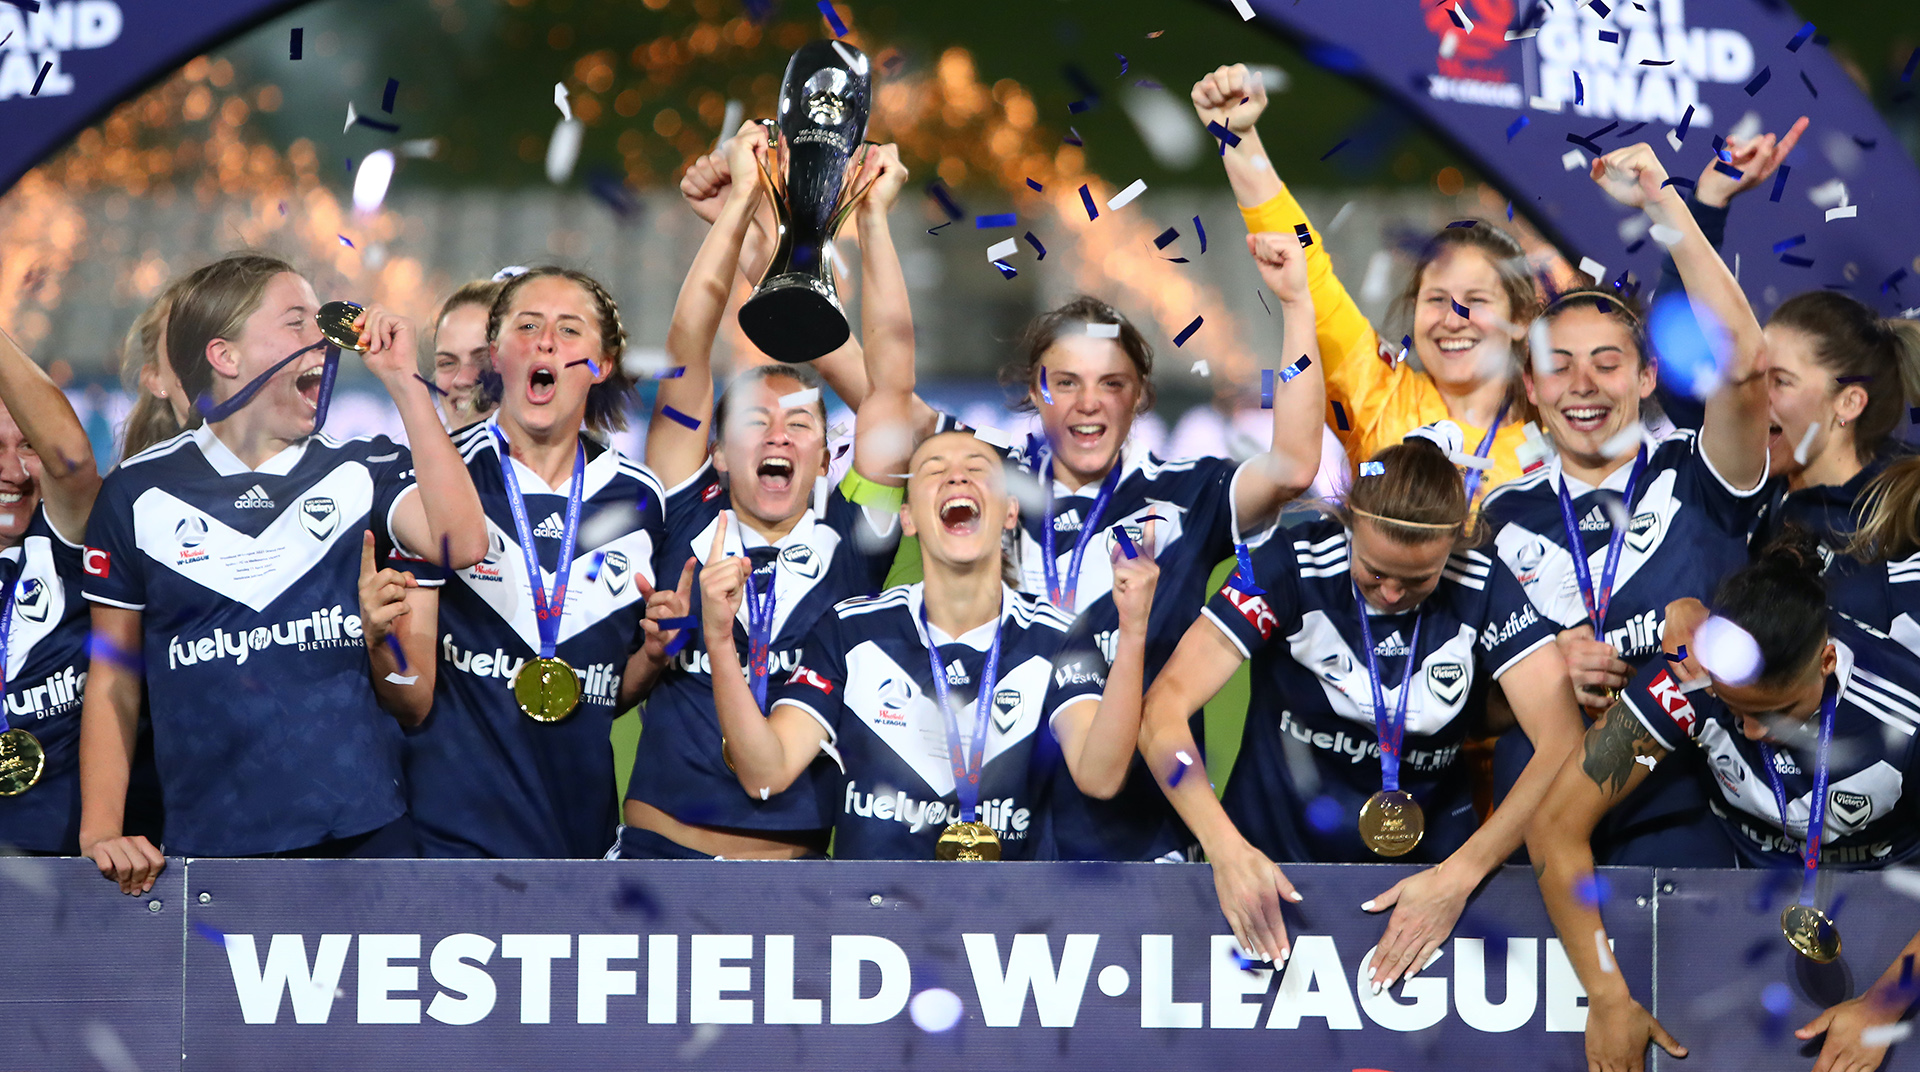 Melbourne Victory lifting the Westfield W-League trophy